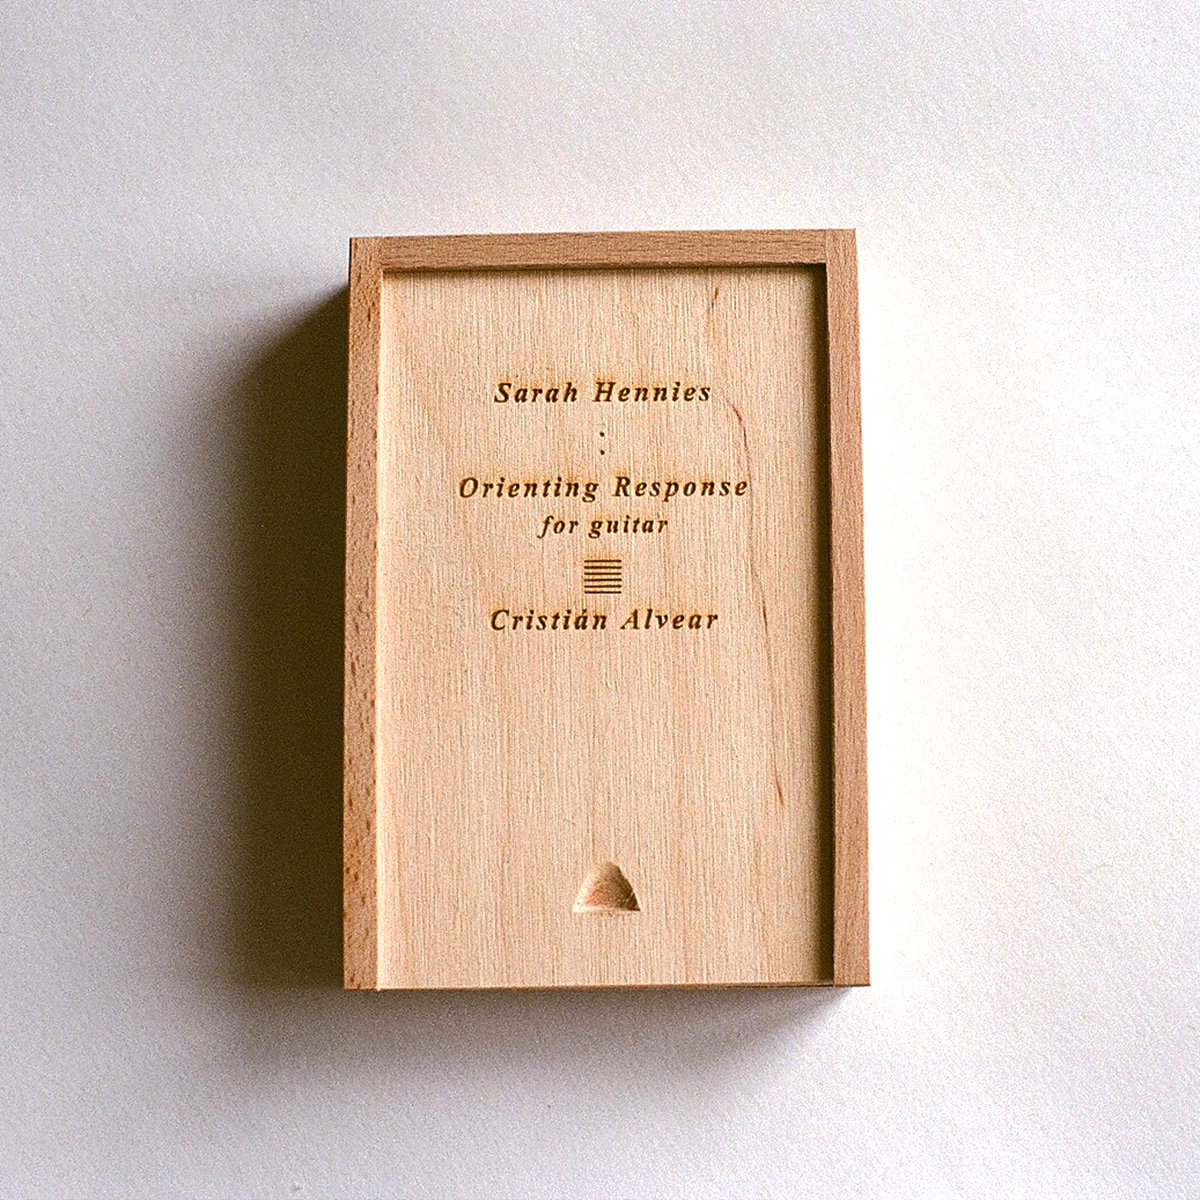 Orienting Response Cassette - Limited edition in wooden box